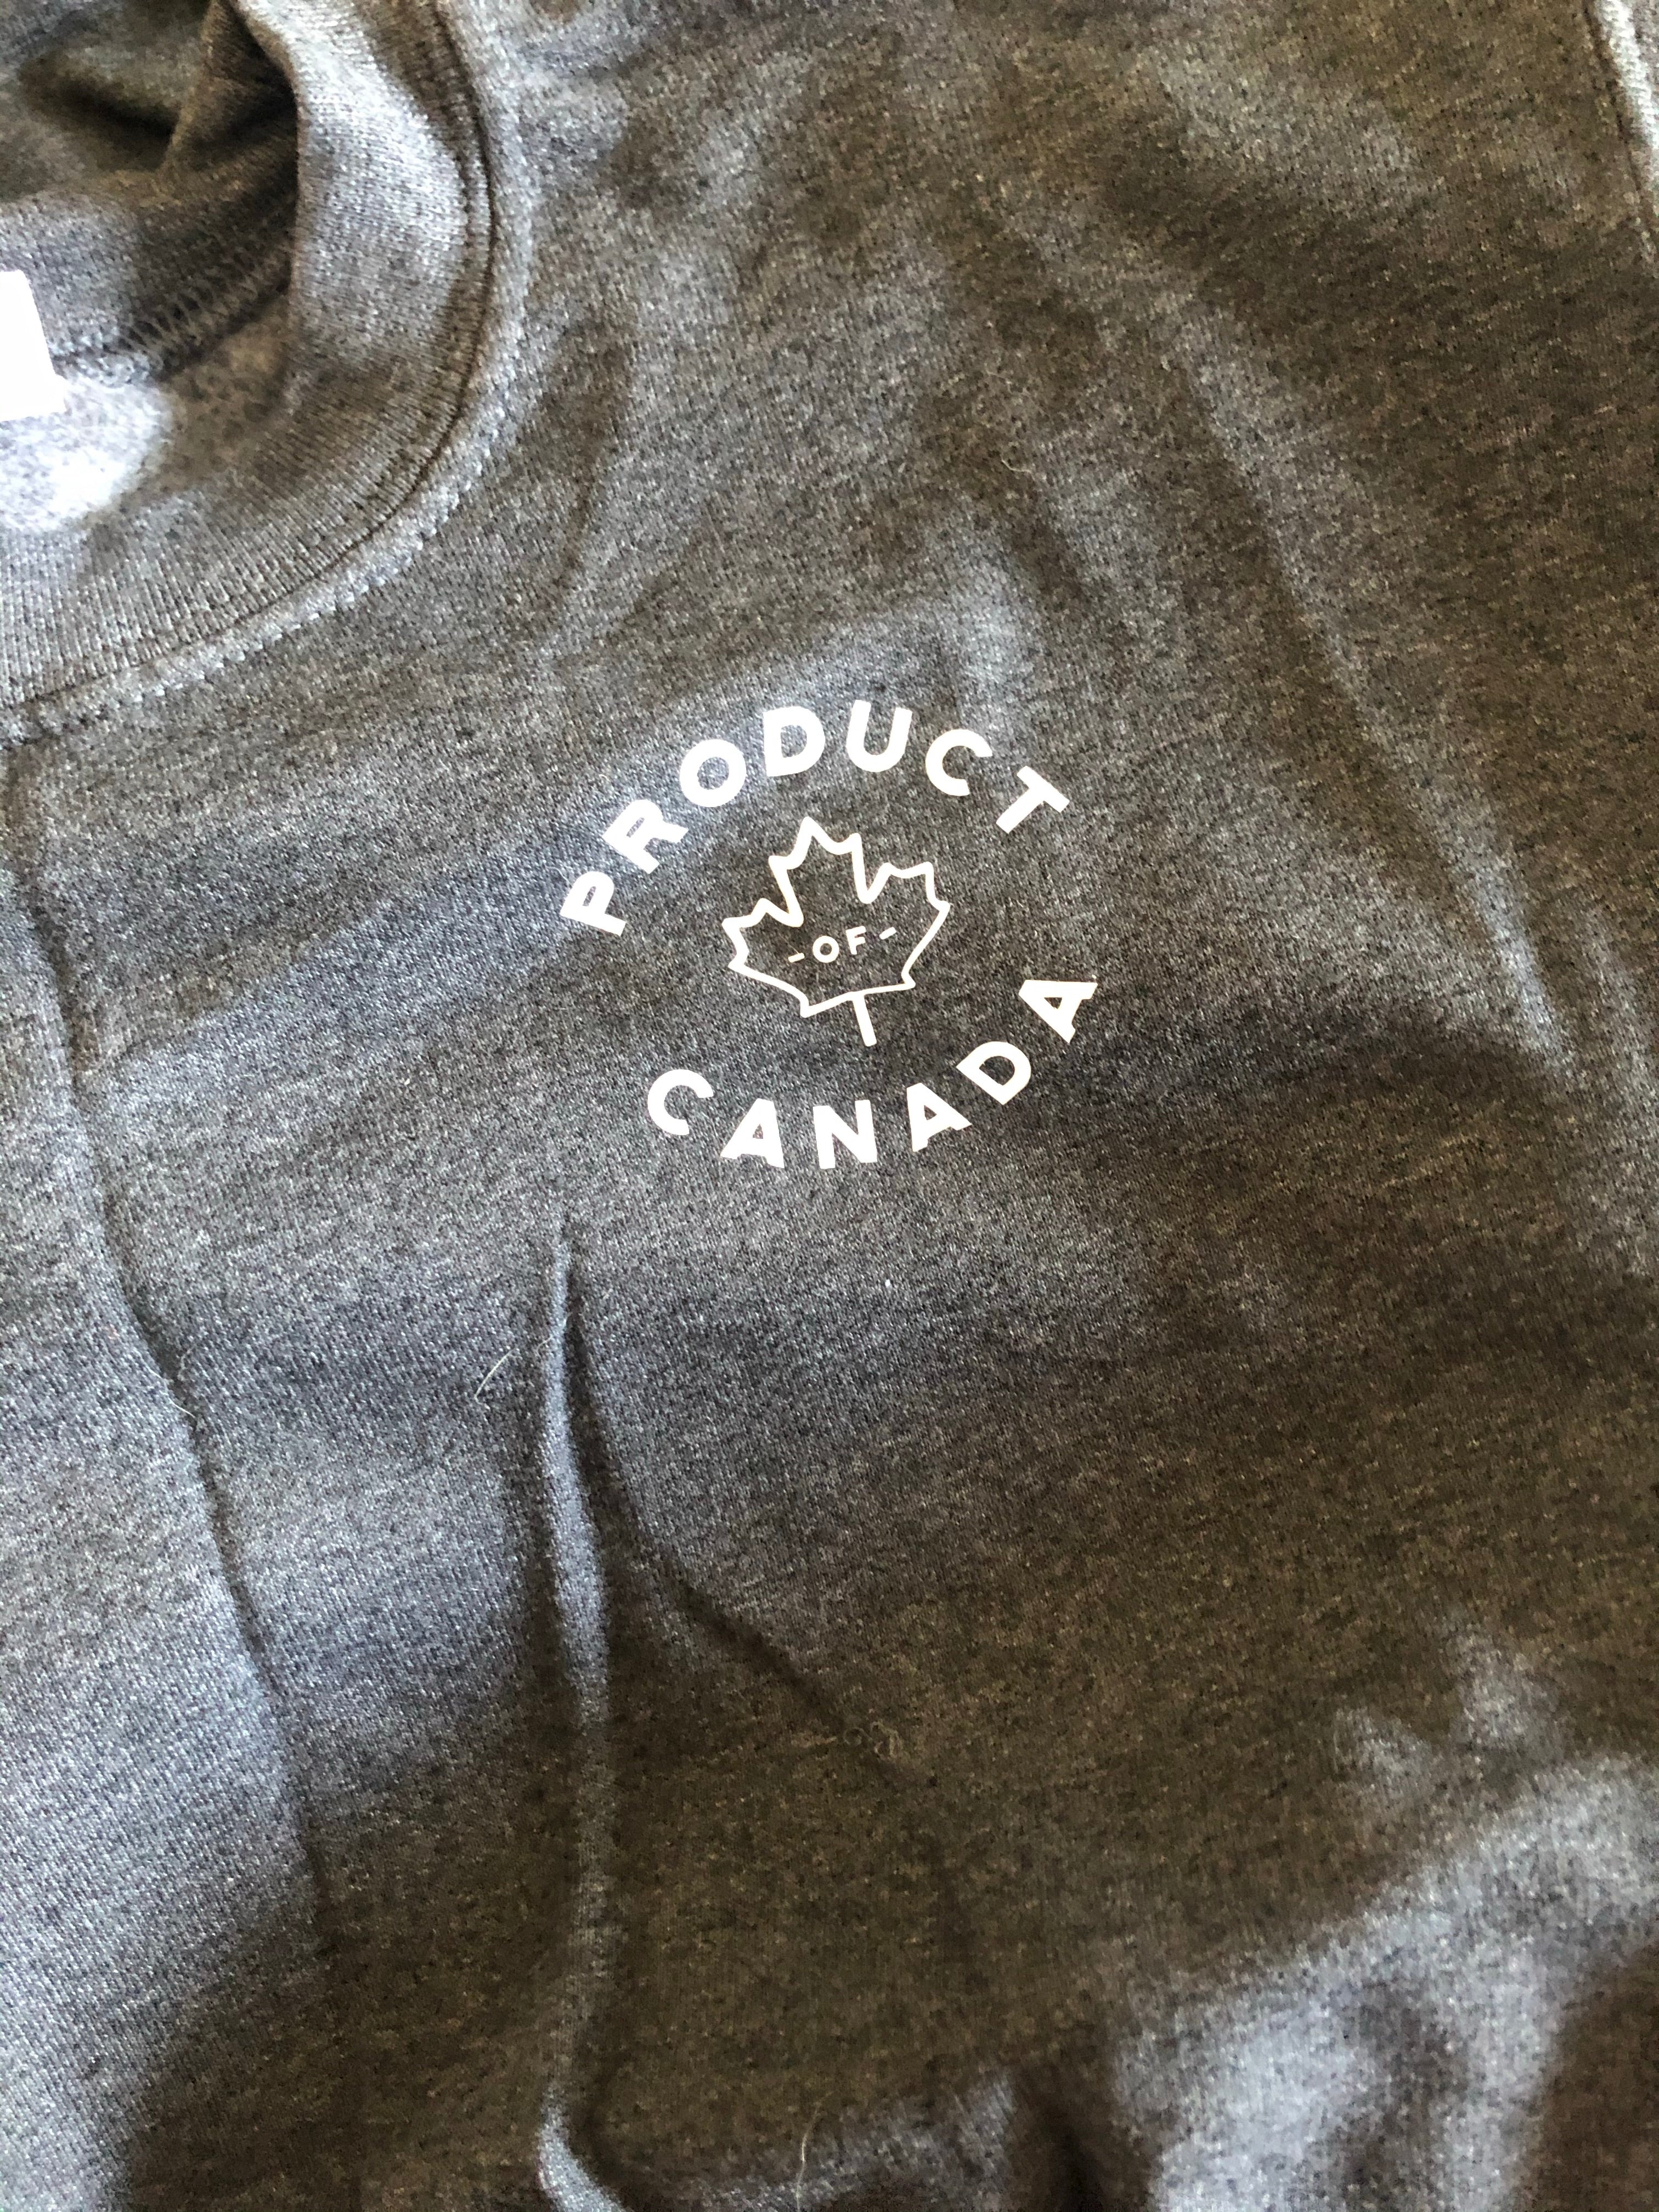 Product or Canada Crest